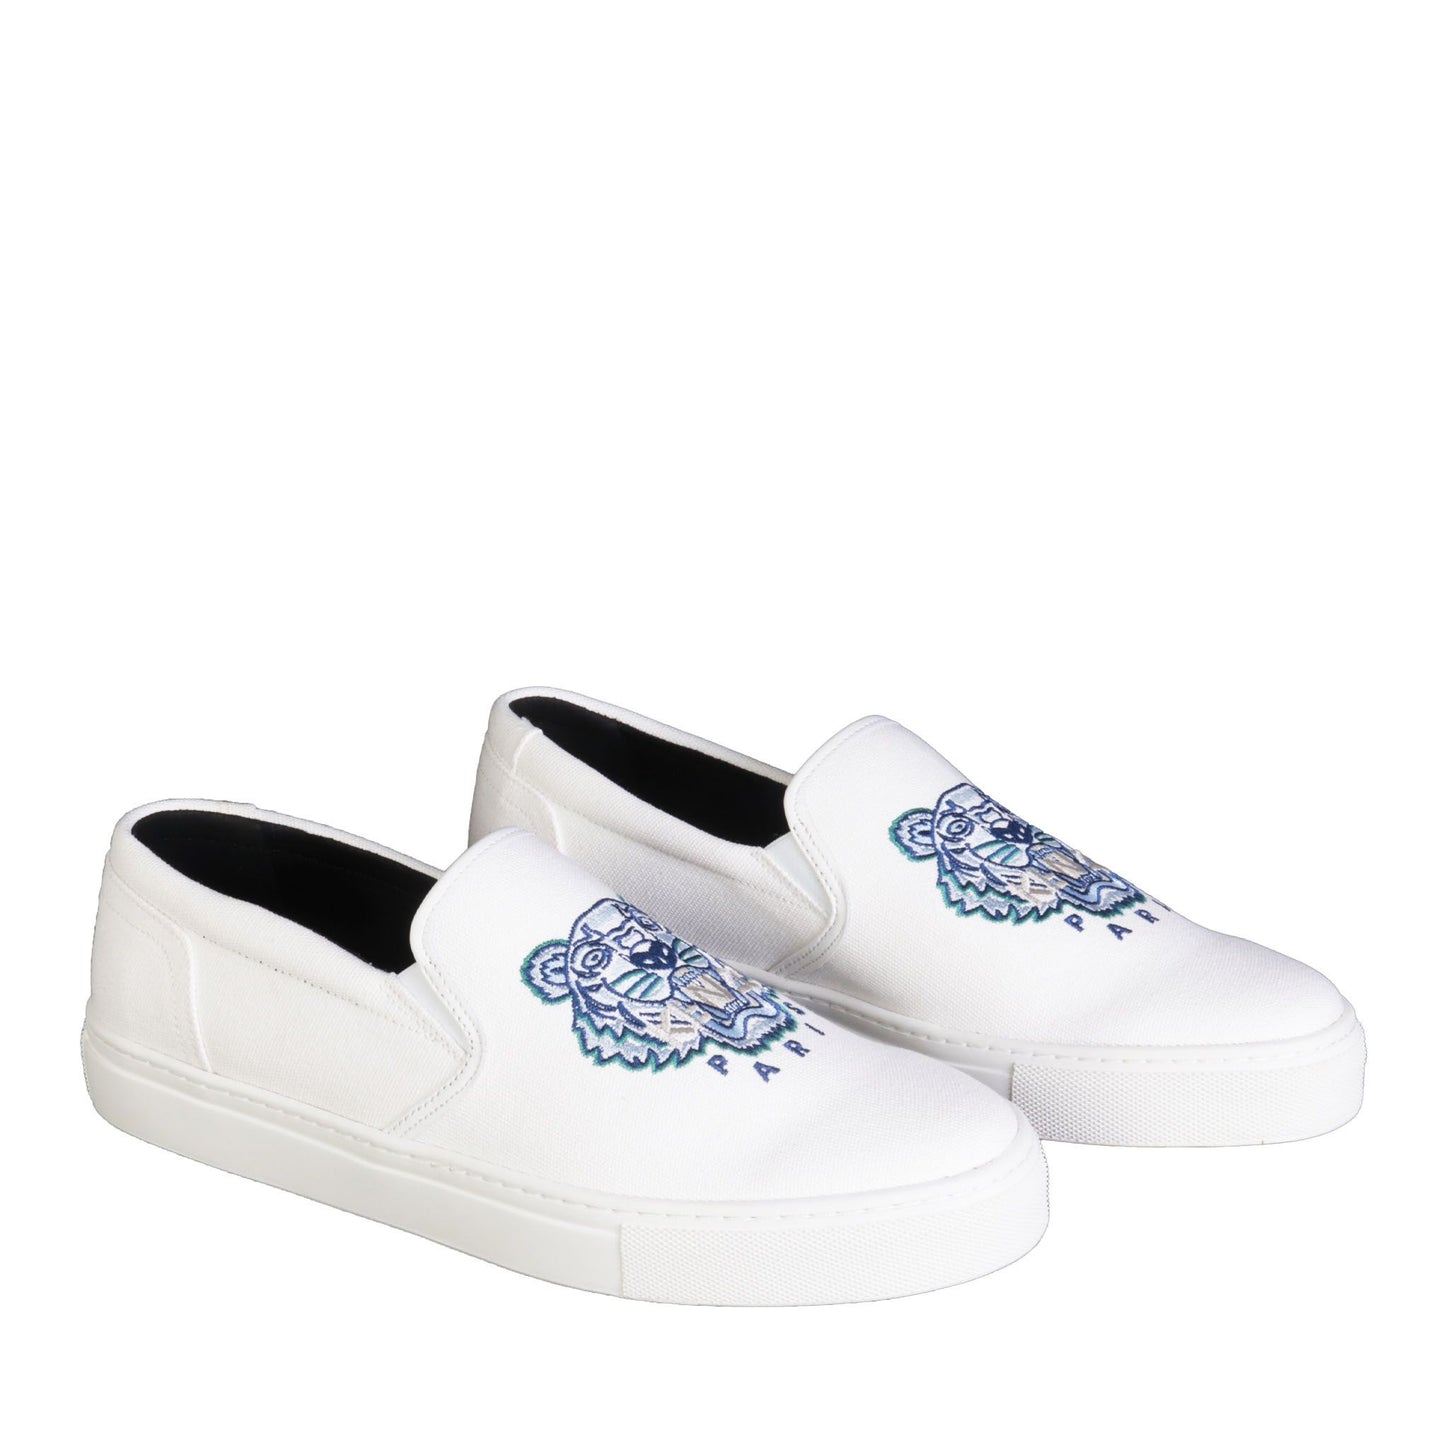 Elegant Kenzo Slip Ons with Rubber Sole